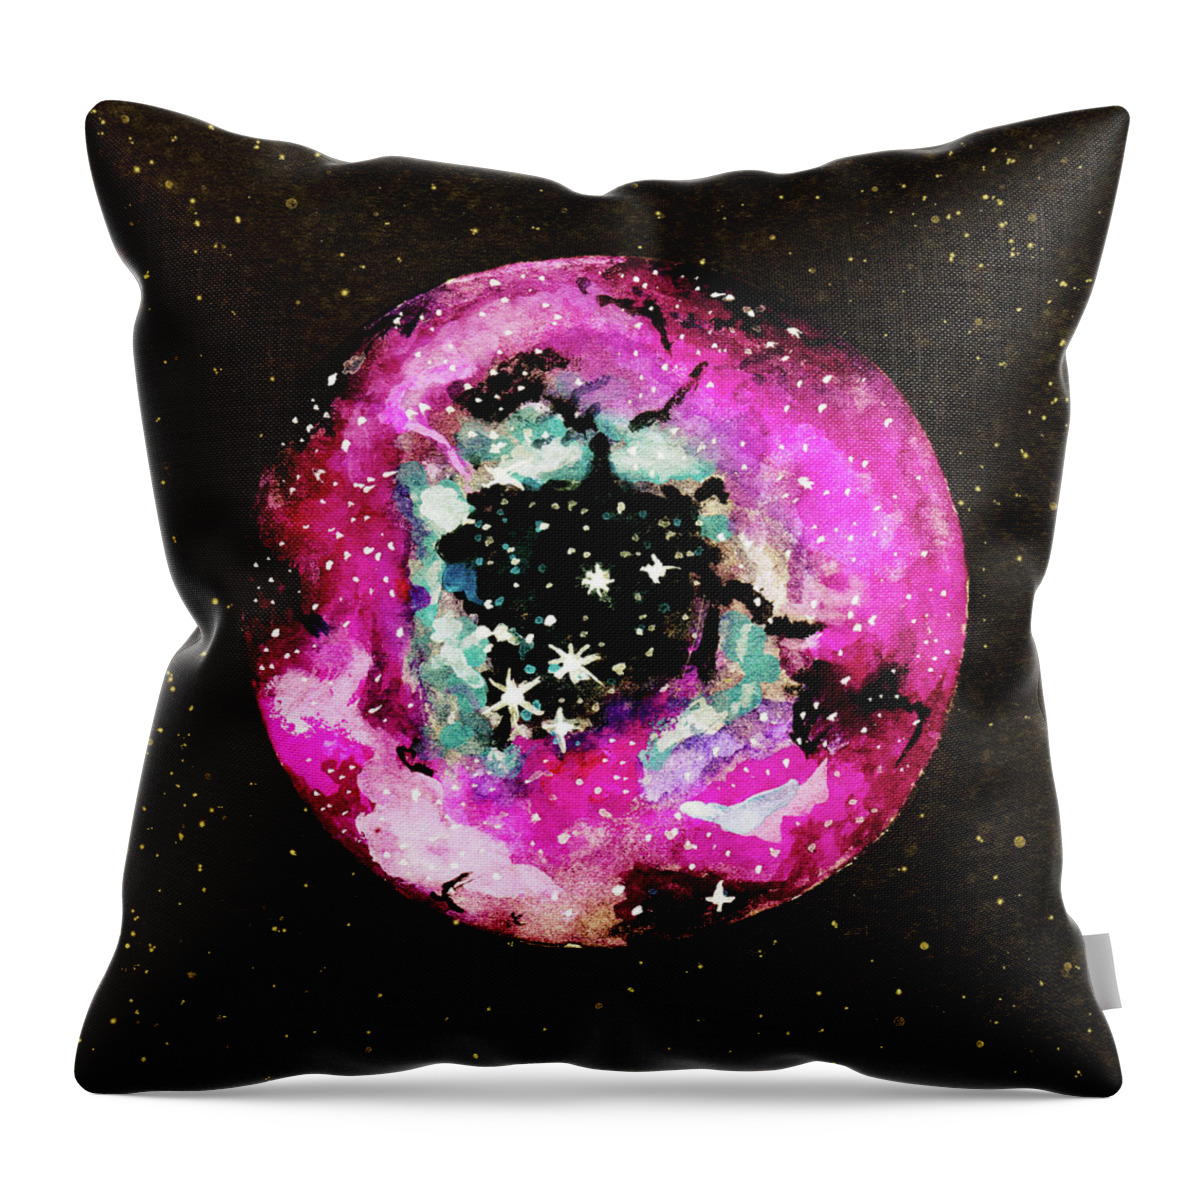 Sky Throw Pillow featuring the painting Womb of the Universe by Srimati Arya Moon